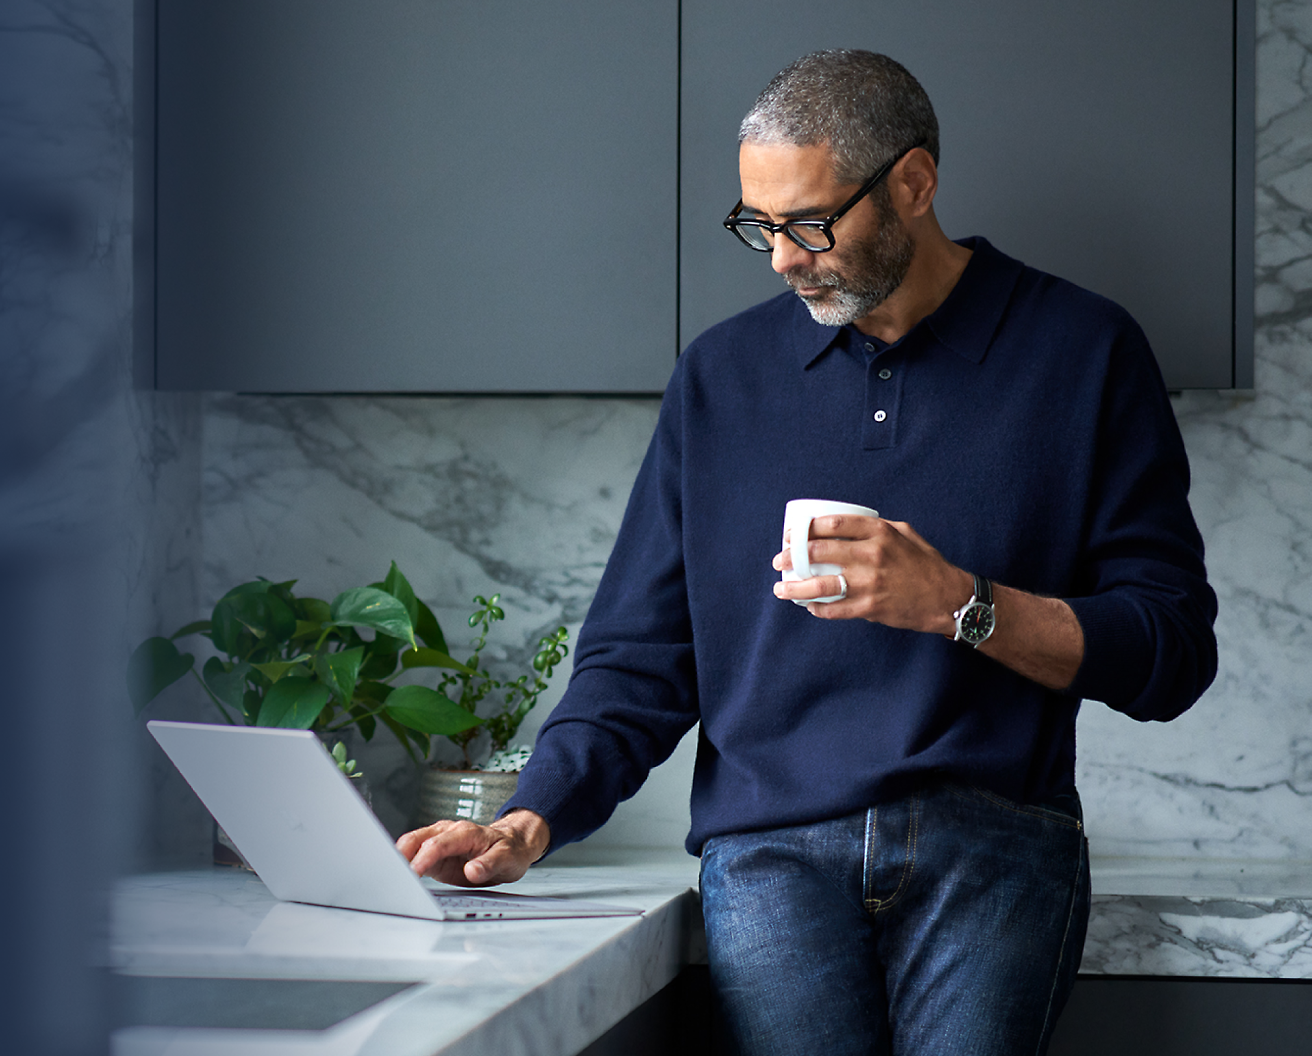 Middle-aged man with glasses, holding a coffee cup, using a laptop in a modern kitchen.